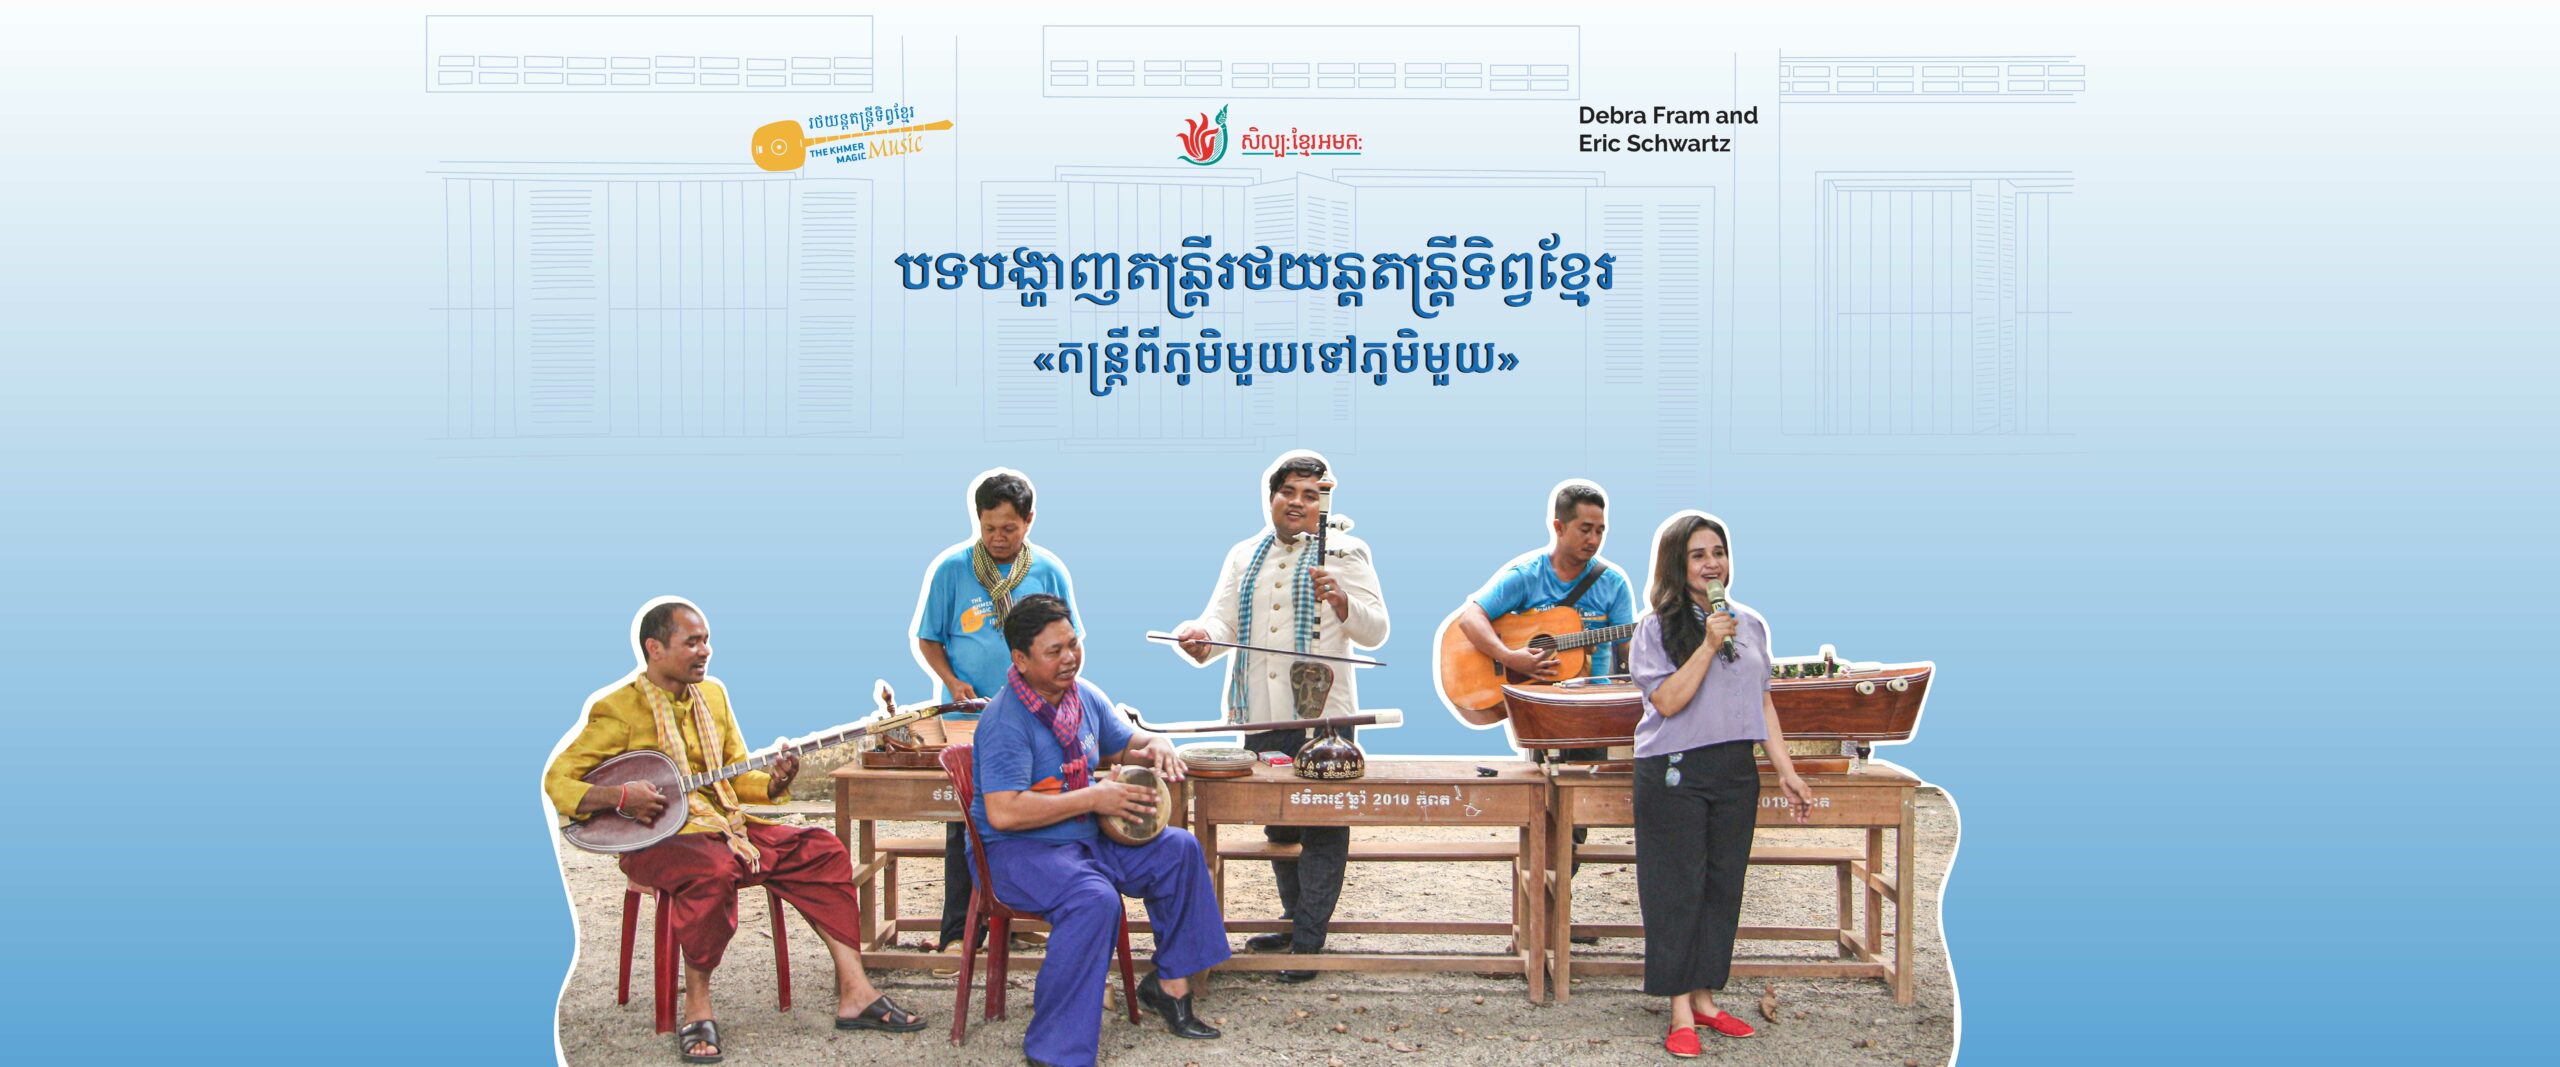 The Khmer Magic Music Bus Engages Youths With Traditional Music